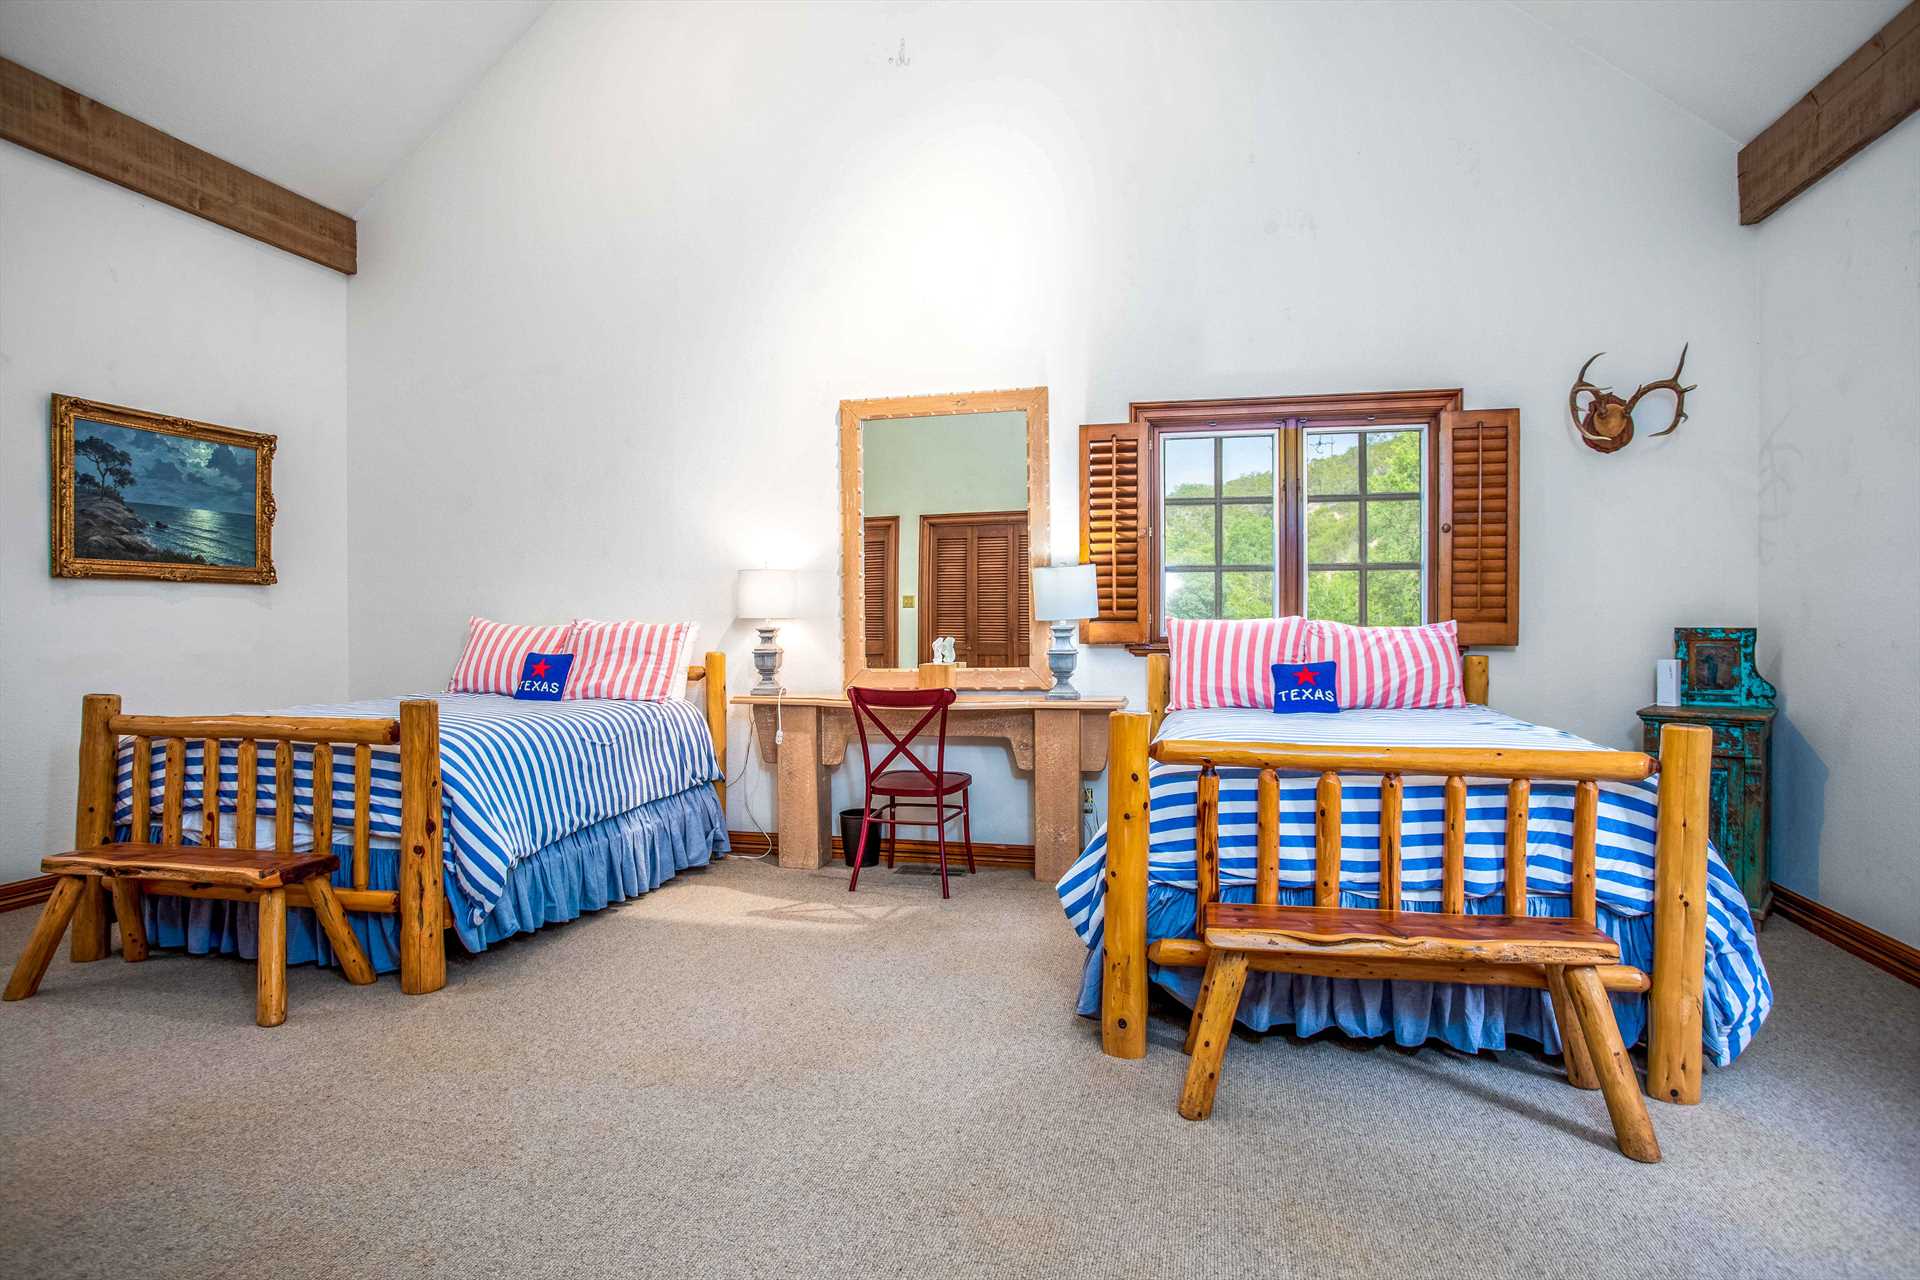                                                 Two plush queen-sized beds can be found in the Homestead's second bedroom, with unique cedar frames also found in the other bedrooms.